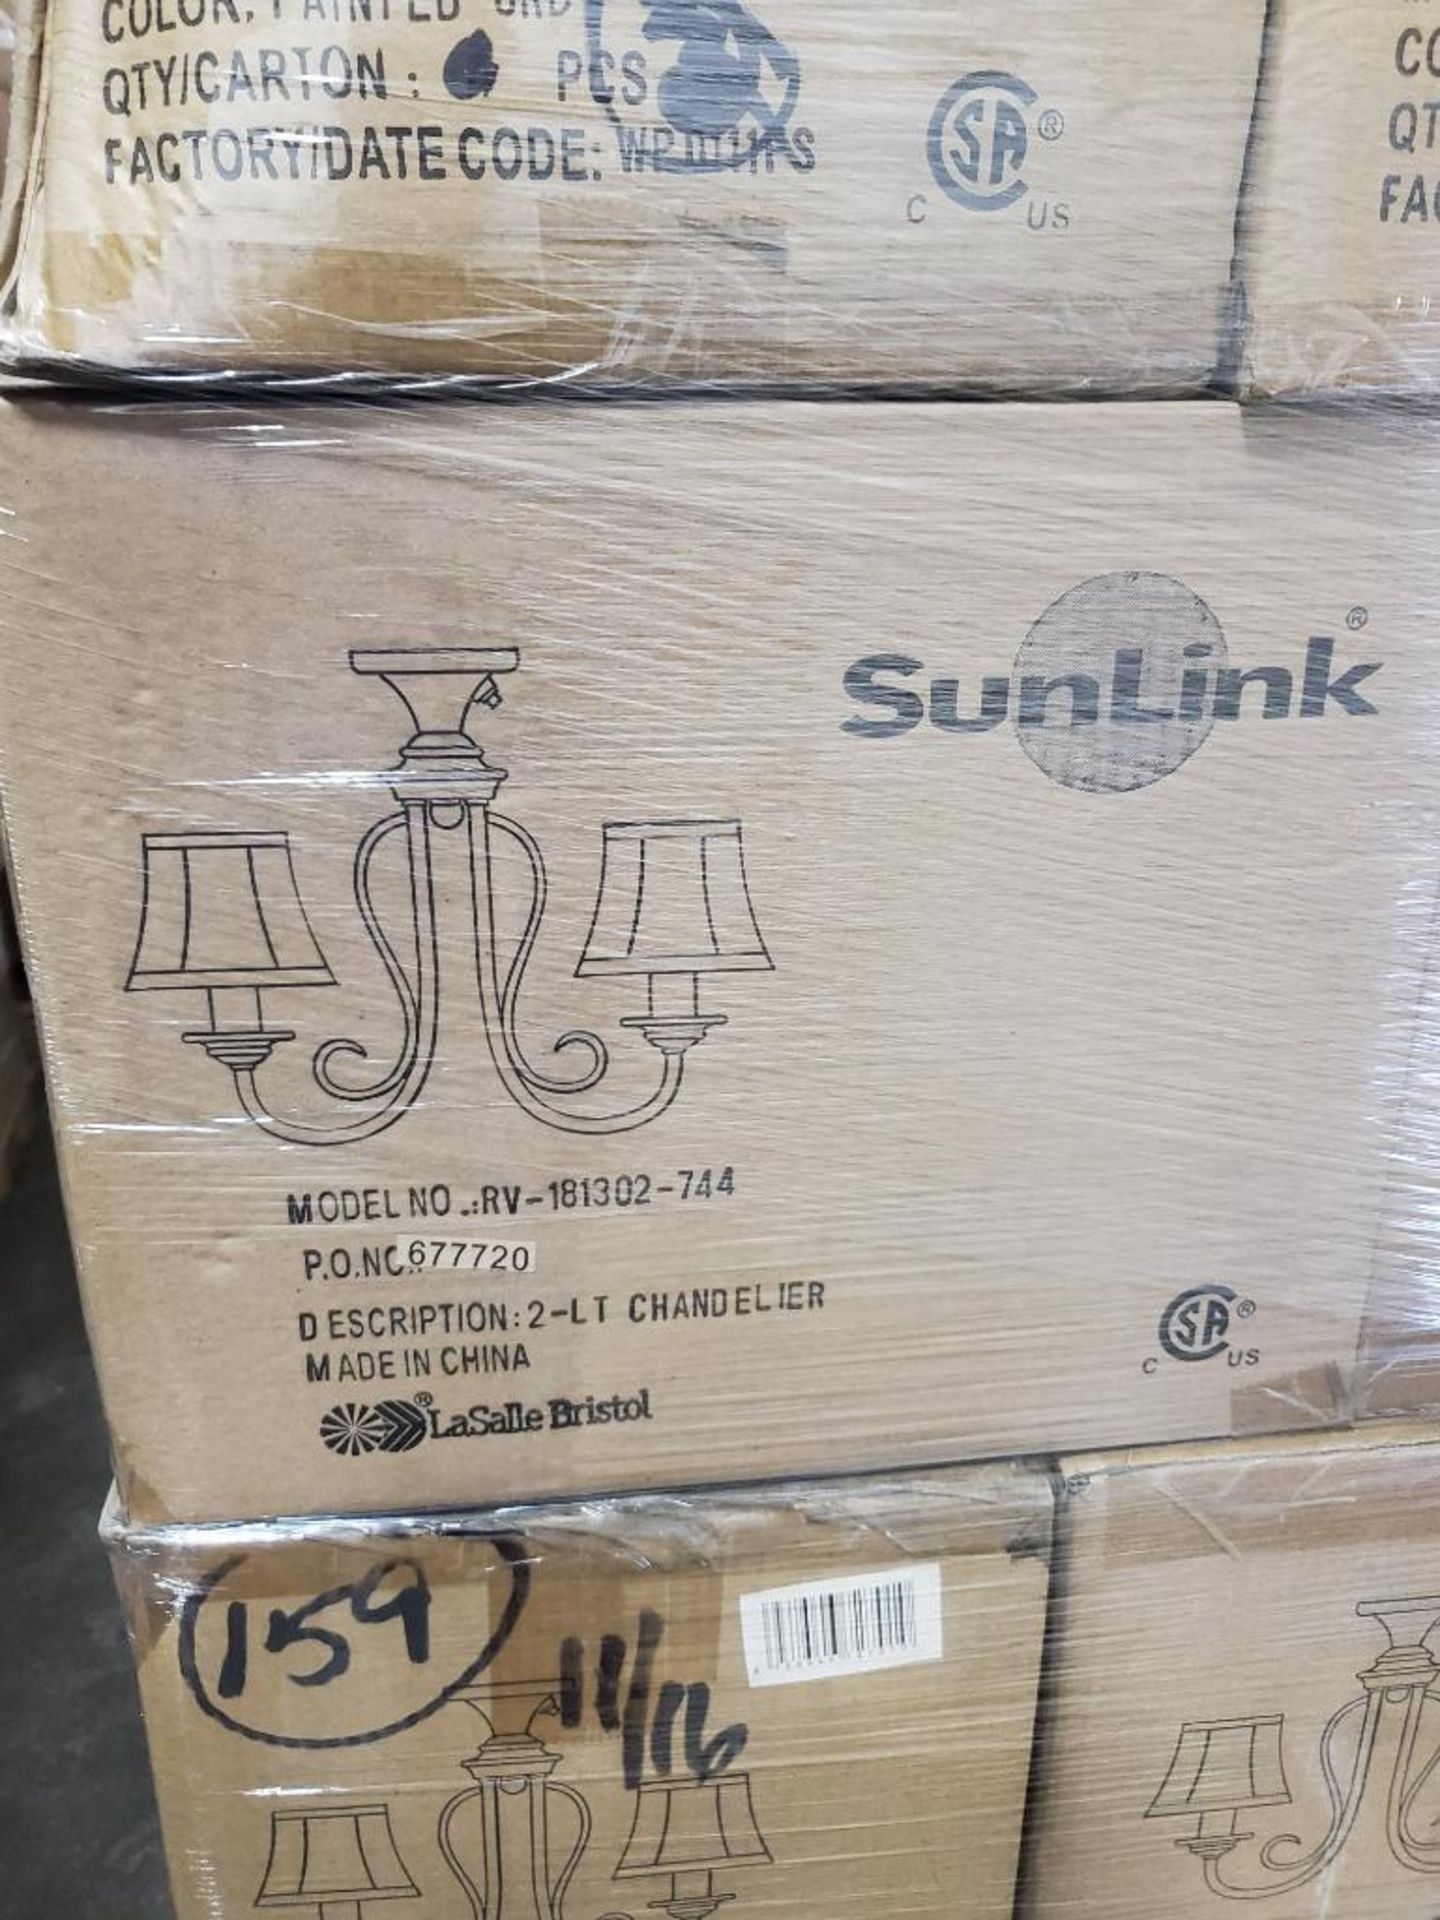 Qty 159 - SunLink 12 volt 2-light chandelier w/ shade. Part # RV-181302-744. New in bulk box. - Image 7 of 9